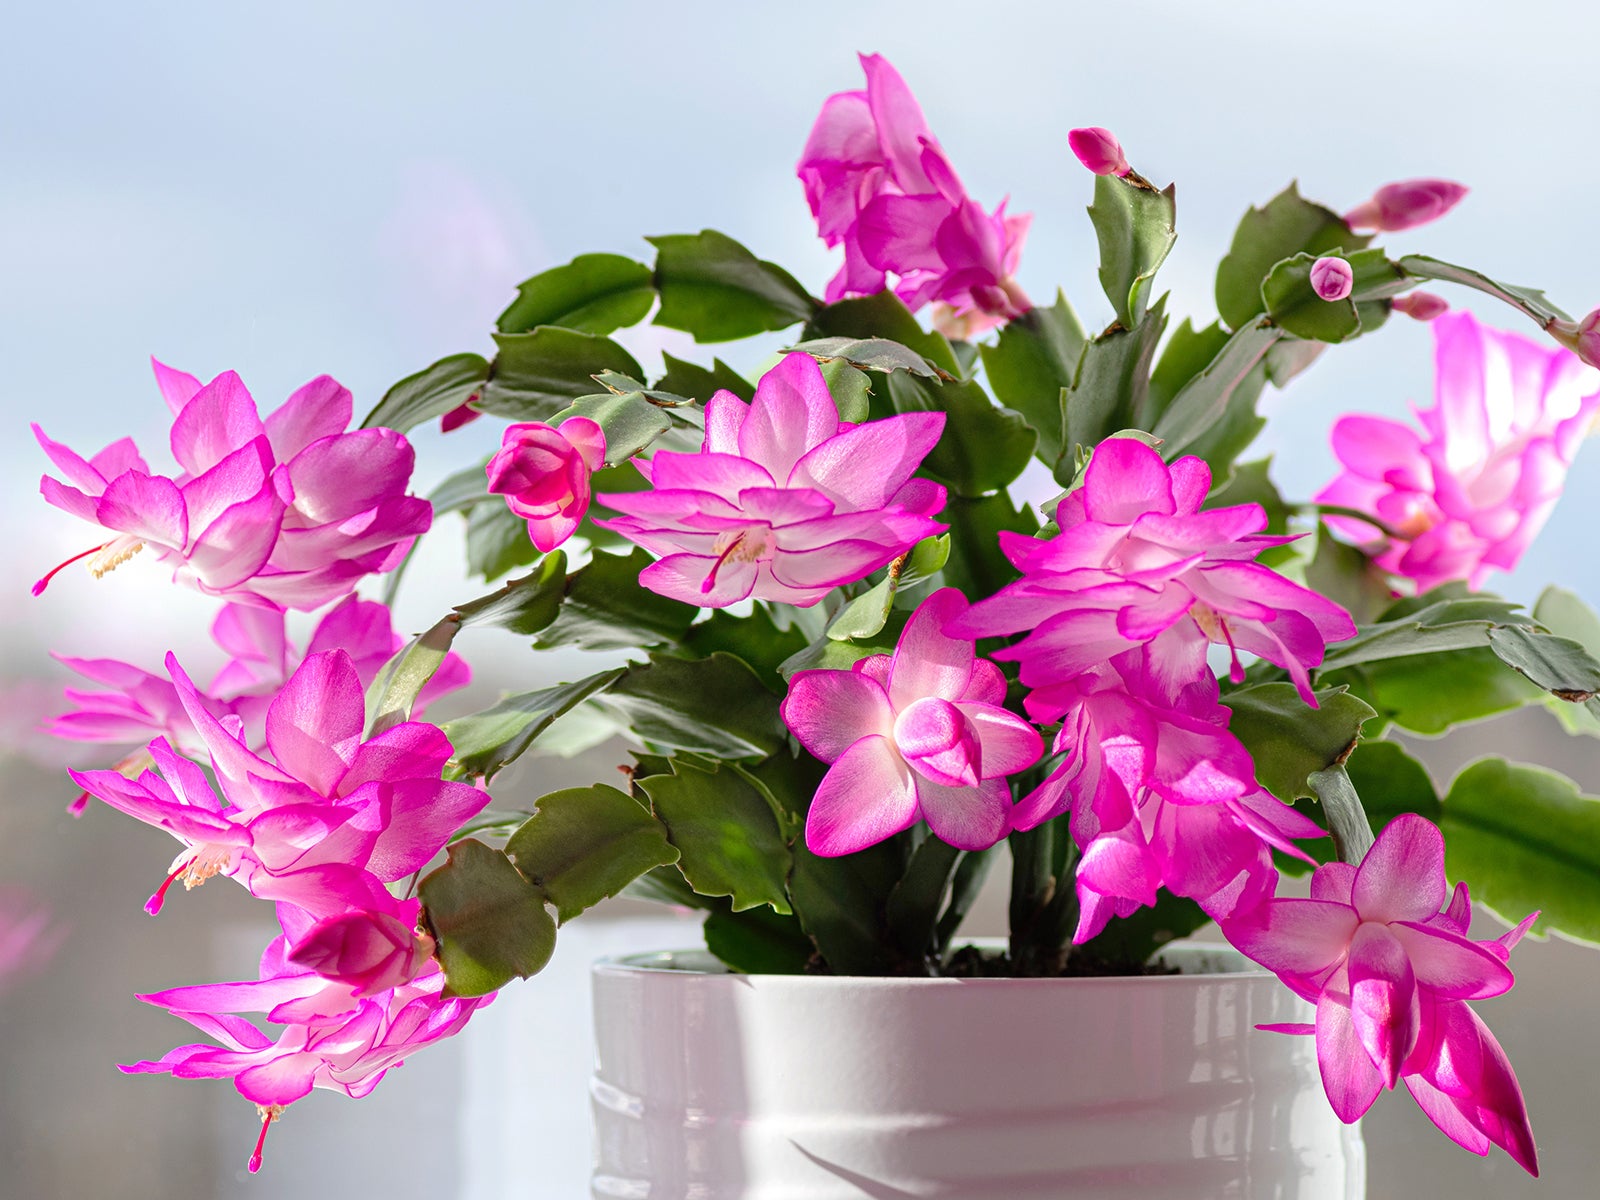 Thanksgiving cactus with bright pink flowers in white pot